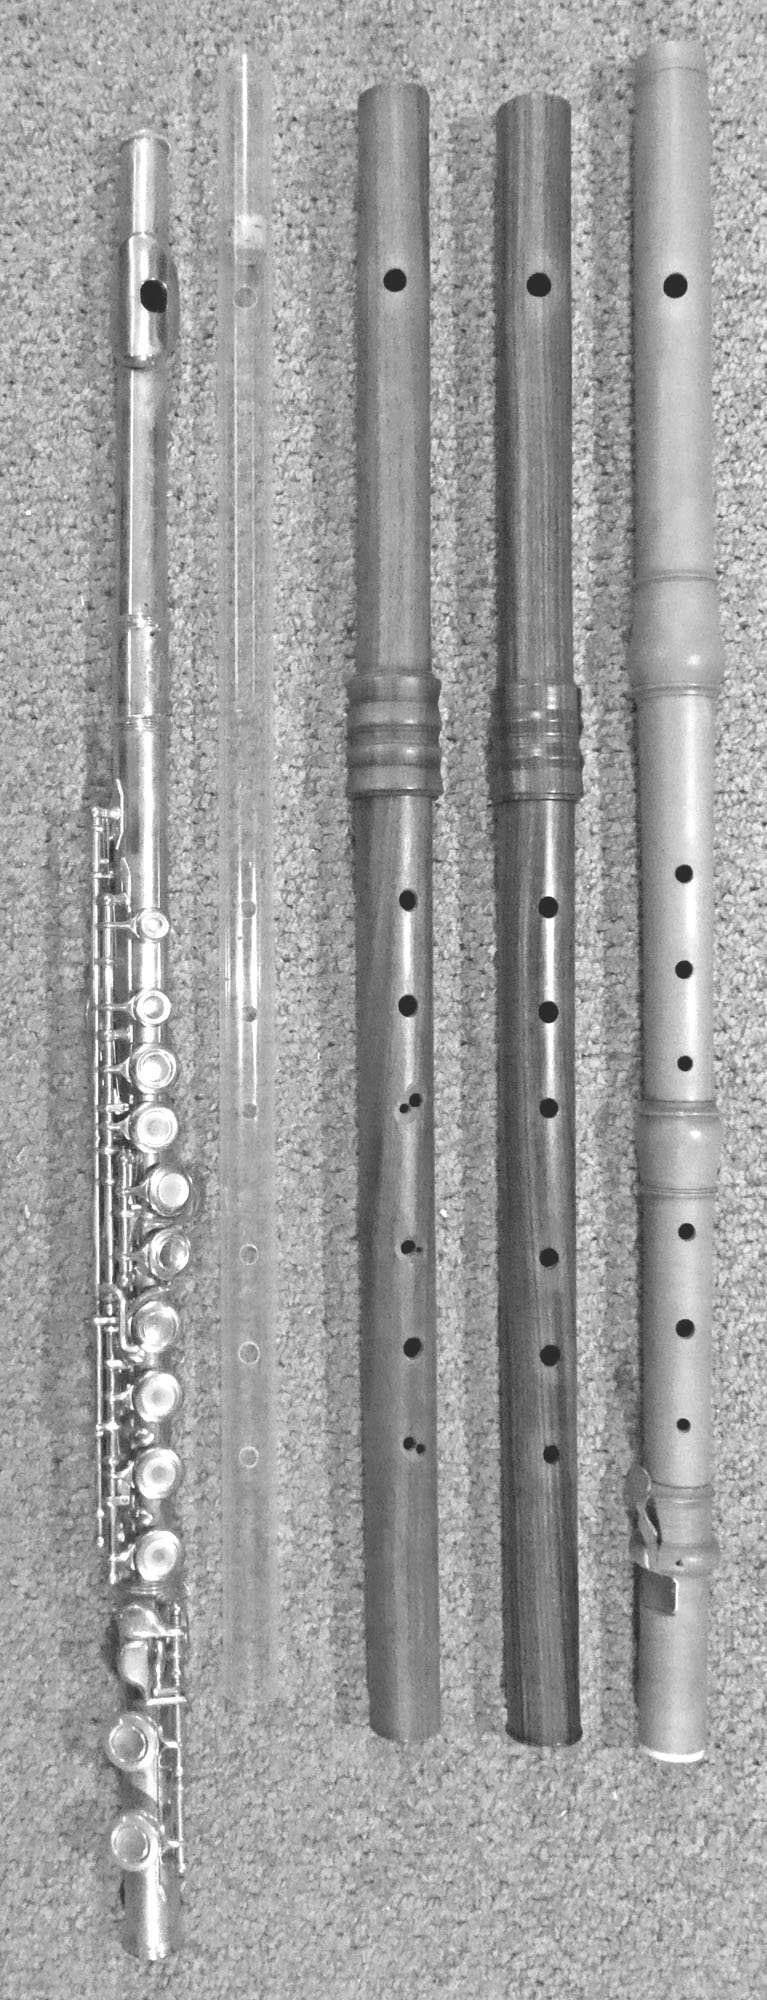 9.8 Some conclusions The renaissance type of flute with a cylindrical bore and 6 fingerholes is in interesting instrument for the amateur woodwind maker.